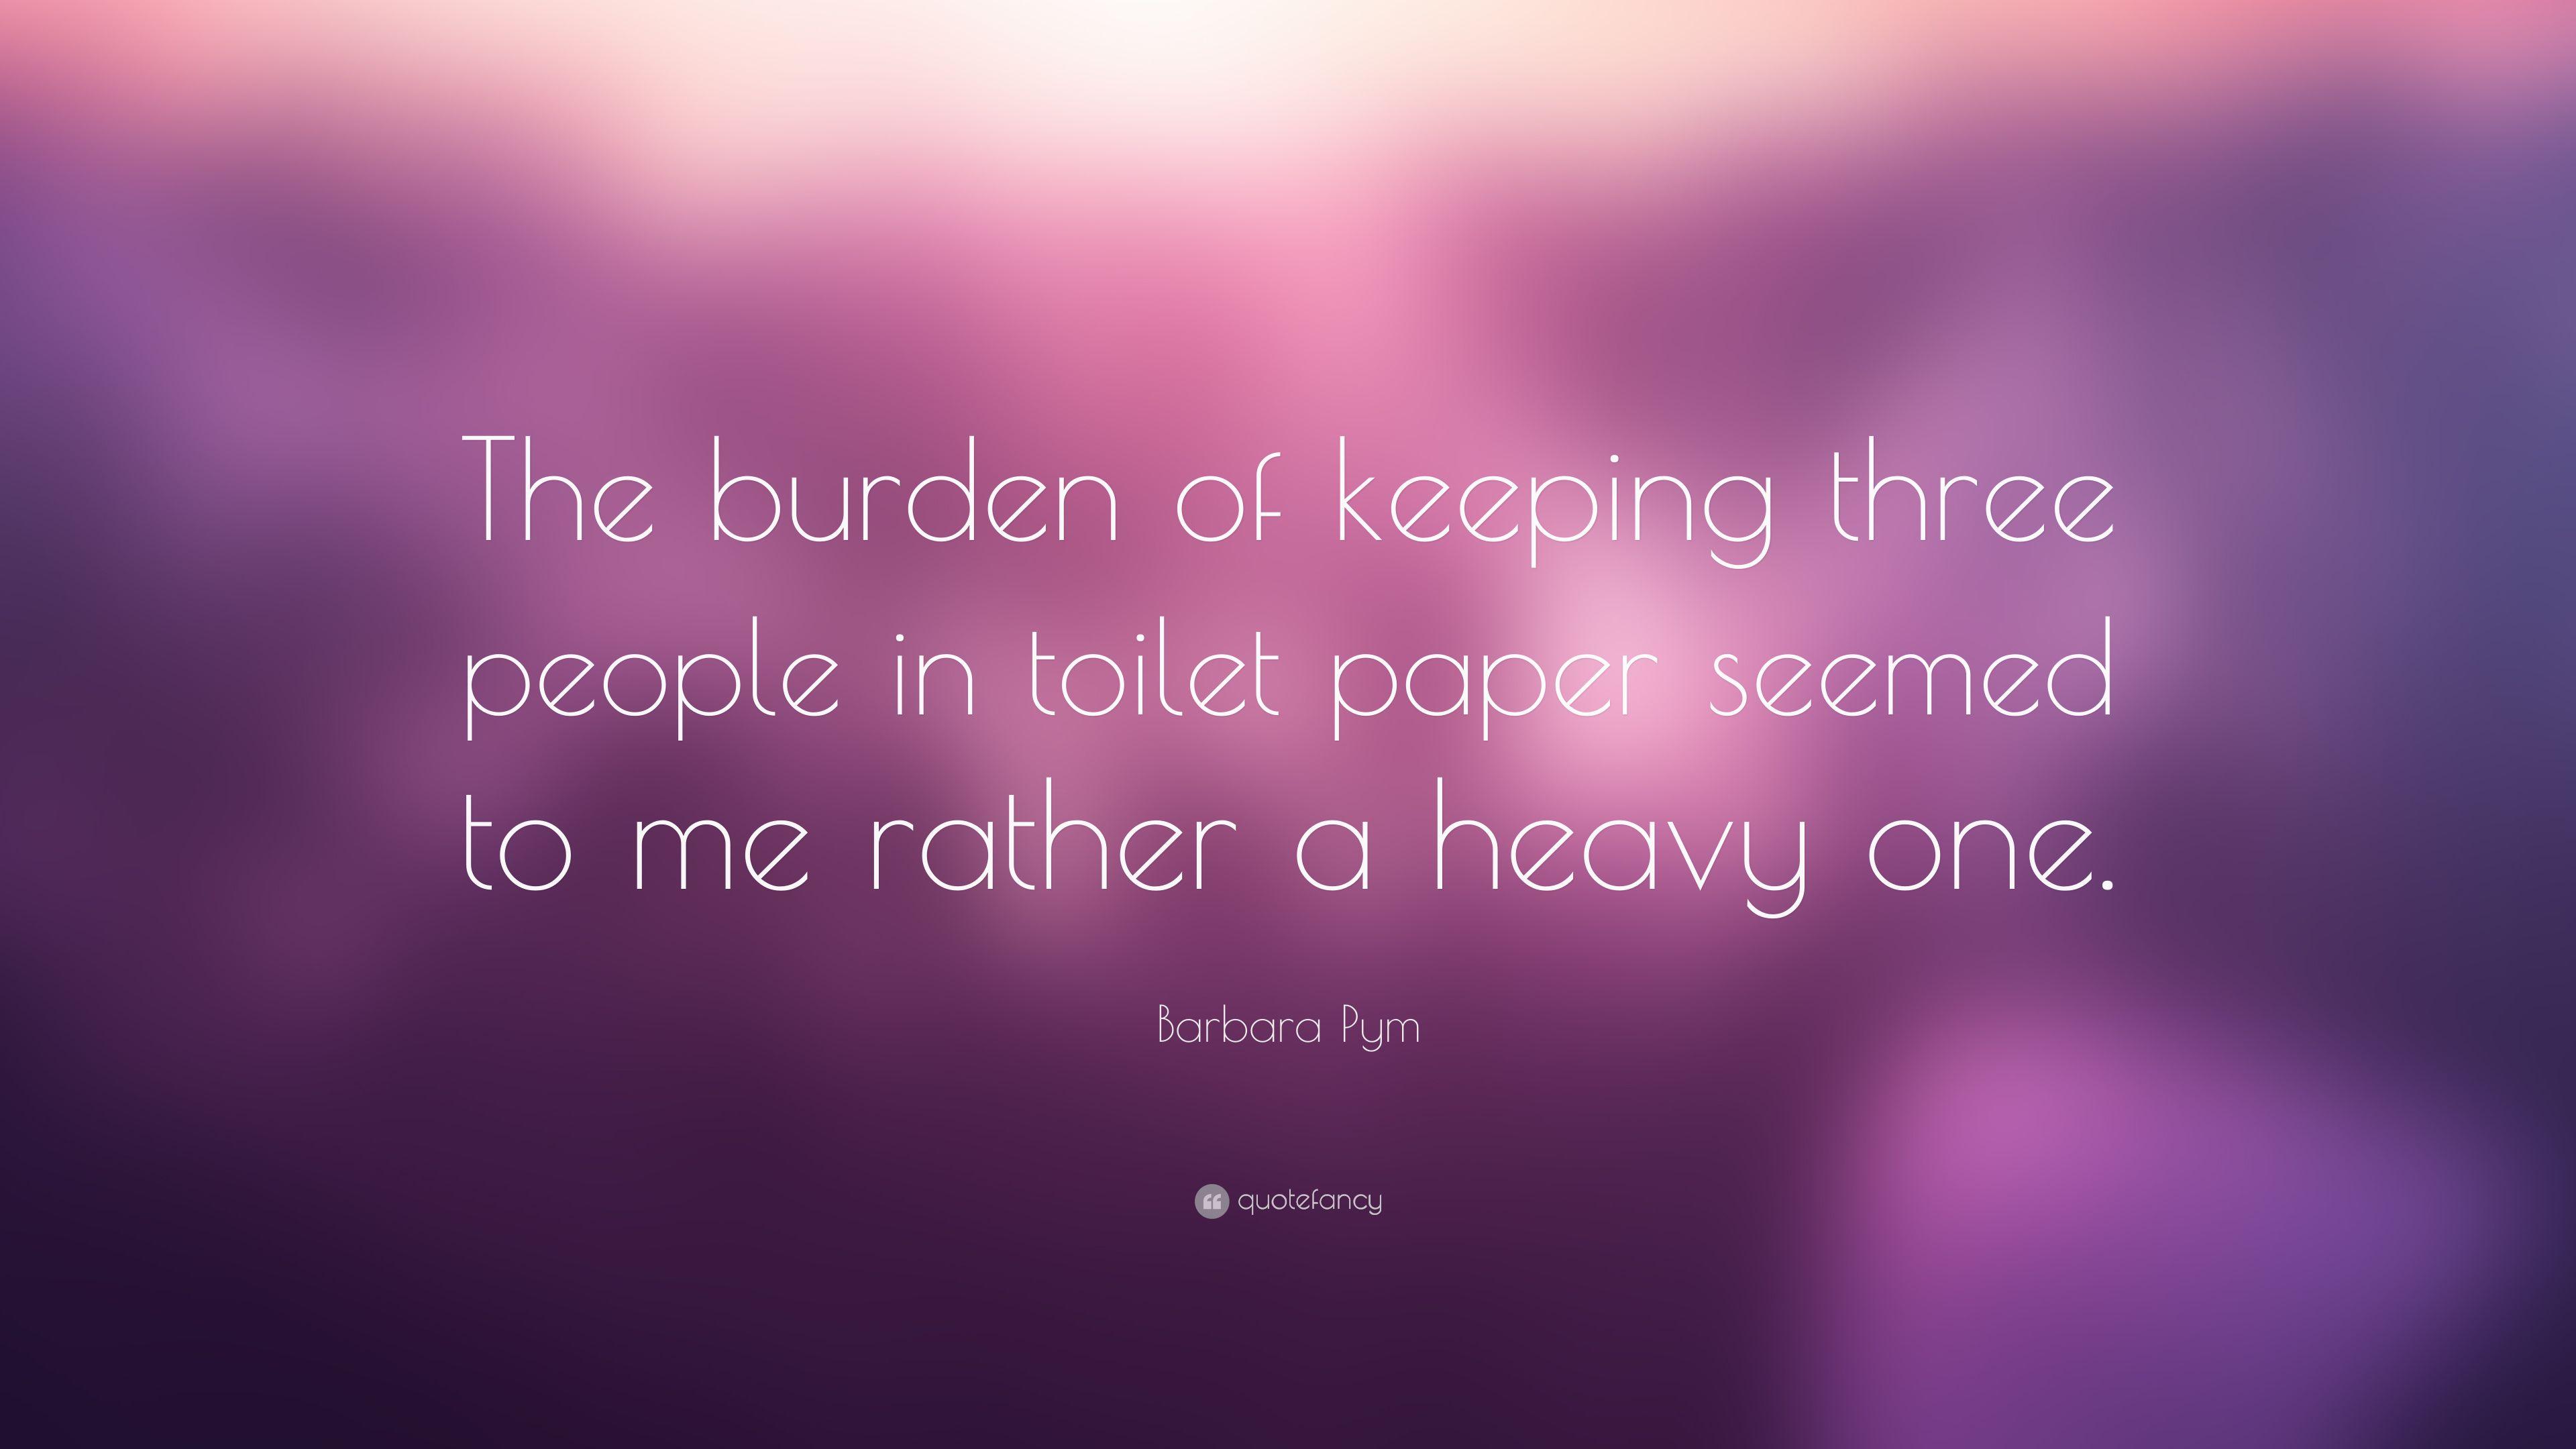 Barbara Pym Quote: “The burden of keeping three people in toilet